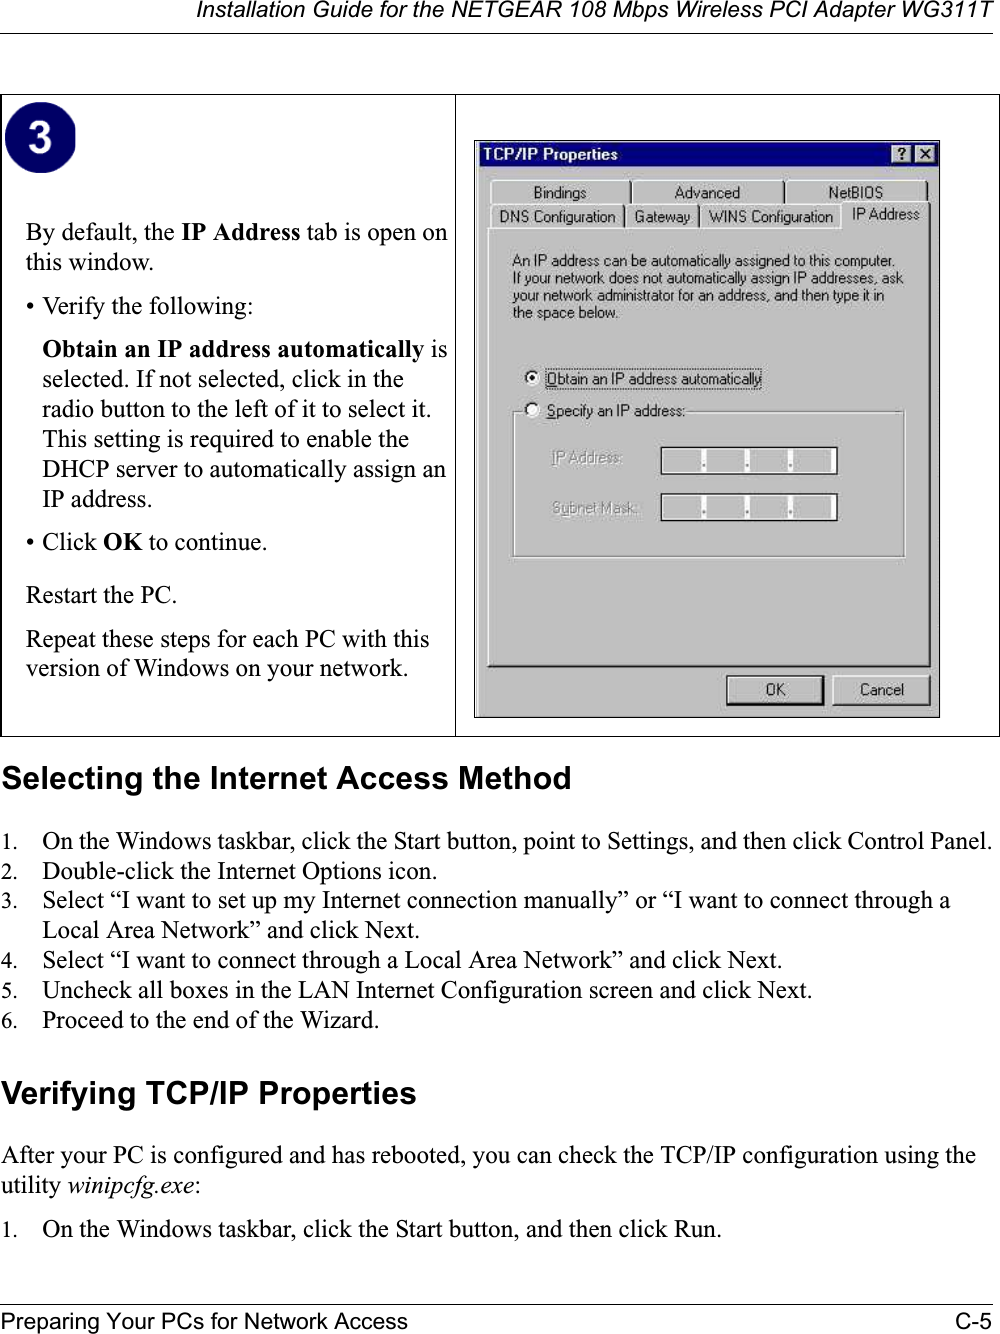 Installation Guide for the NETGEAR 108 Mbps Wireless PCI Adapter WG311TPreparing Your PCs for Network Access C-5Selecting the Internet Access Method1. On the Windows taskbar, click the Start button, point to Settings, and then click Control Panel.2. Double-click the Internet Options icon.3. Select “I want to set up my Internet connection manually” or “I want to connect through a Local Area Network” and click Next.4. Select “I want to connect through a Local Area Network” and click Next.5. Uncheck all boxes in the LAN Internet Configuration screen and click Next.6. Proceed to the end of the Wizard.Verifying TCP/IP PropertiesAfter your PC is configured and has rebooted, you can check the TCP/IP configuration using the utility winipcfg.exe:1. On the Windows taskbar, click the Start button, and then click Run.By default, the IP Address tab is open on this window.• Verify the following:Obtain an IP address automatically isselected. If not selected, click in the radio button to the left of it to select it.  This setting is required to enable the DHCP server to automatically assign an IP address. • Click OK to continue.Restart the PC.Repeat these steps for each PC with this version of Windows on your network.